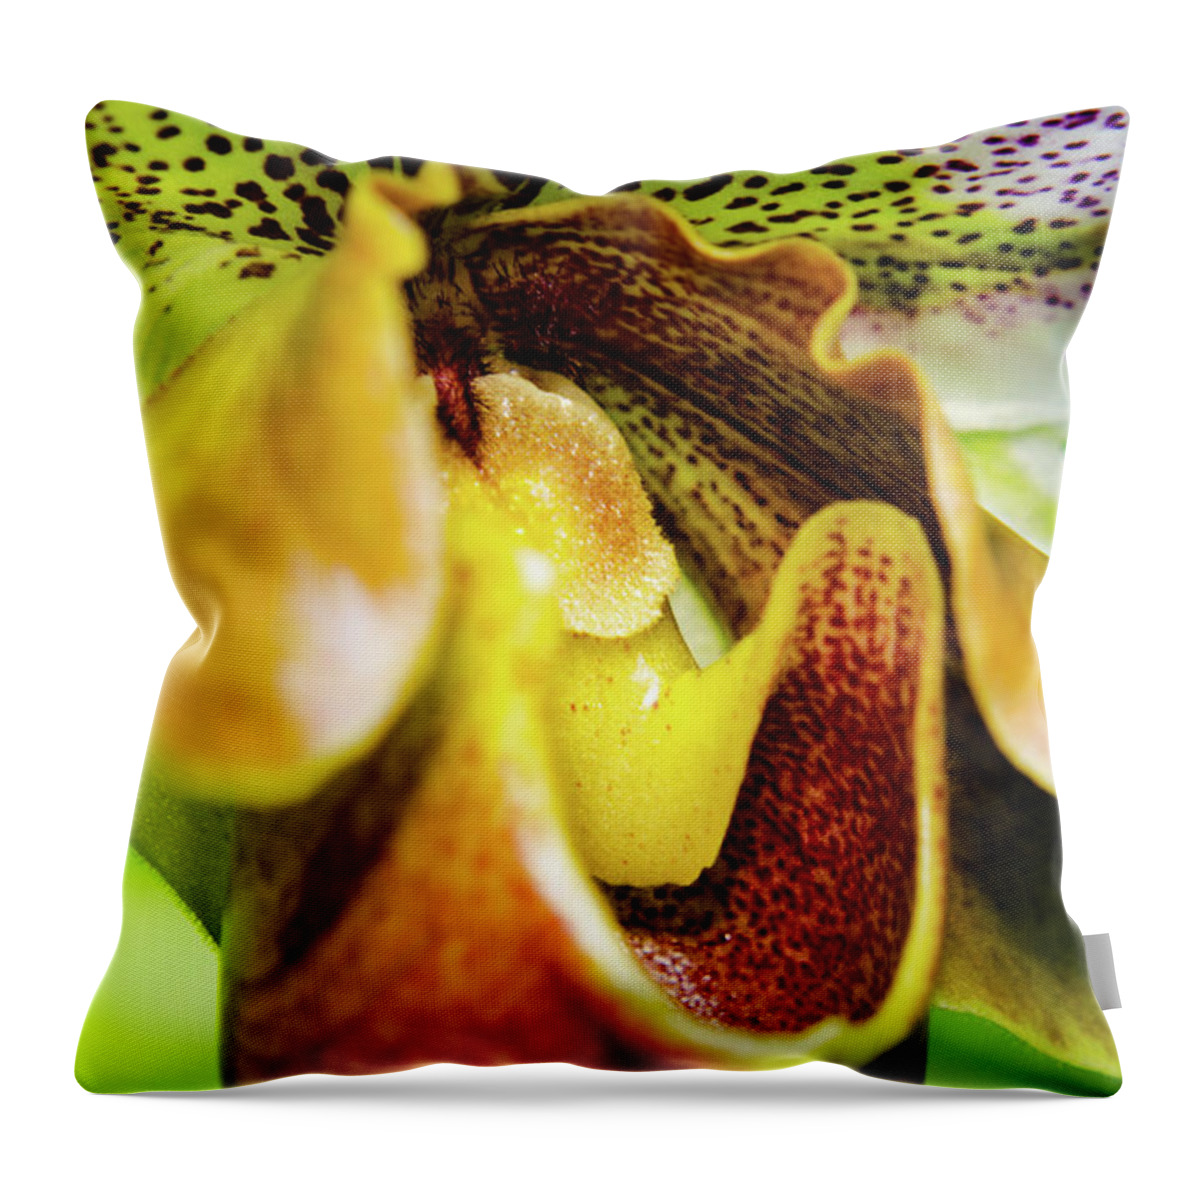 Cleveland Botanical Gardens Throw Pillow featuring the photograph Orchid Faces by Stewart Helberg